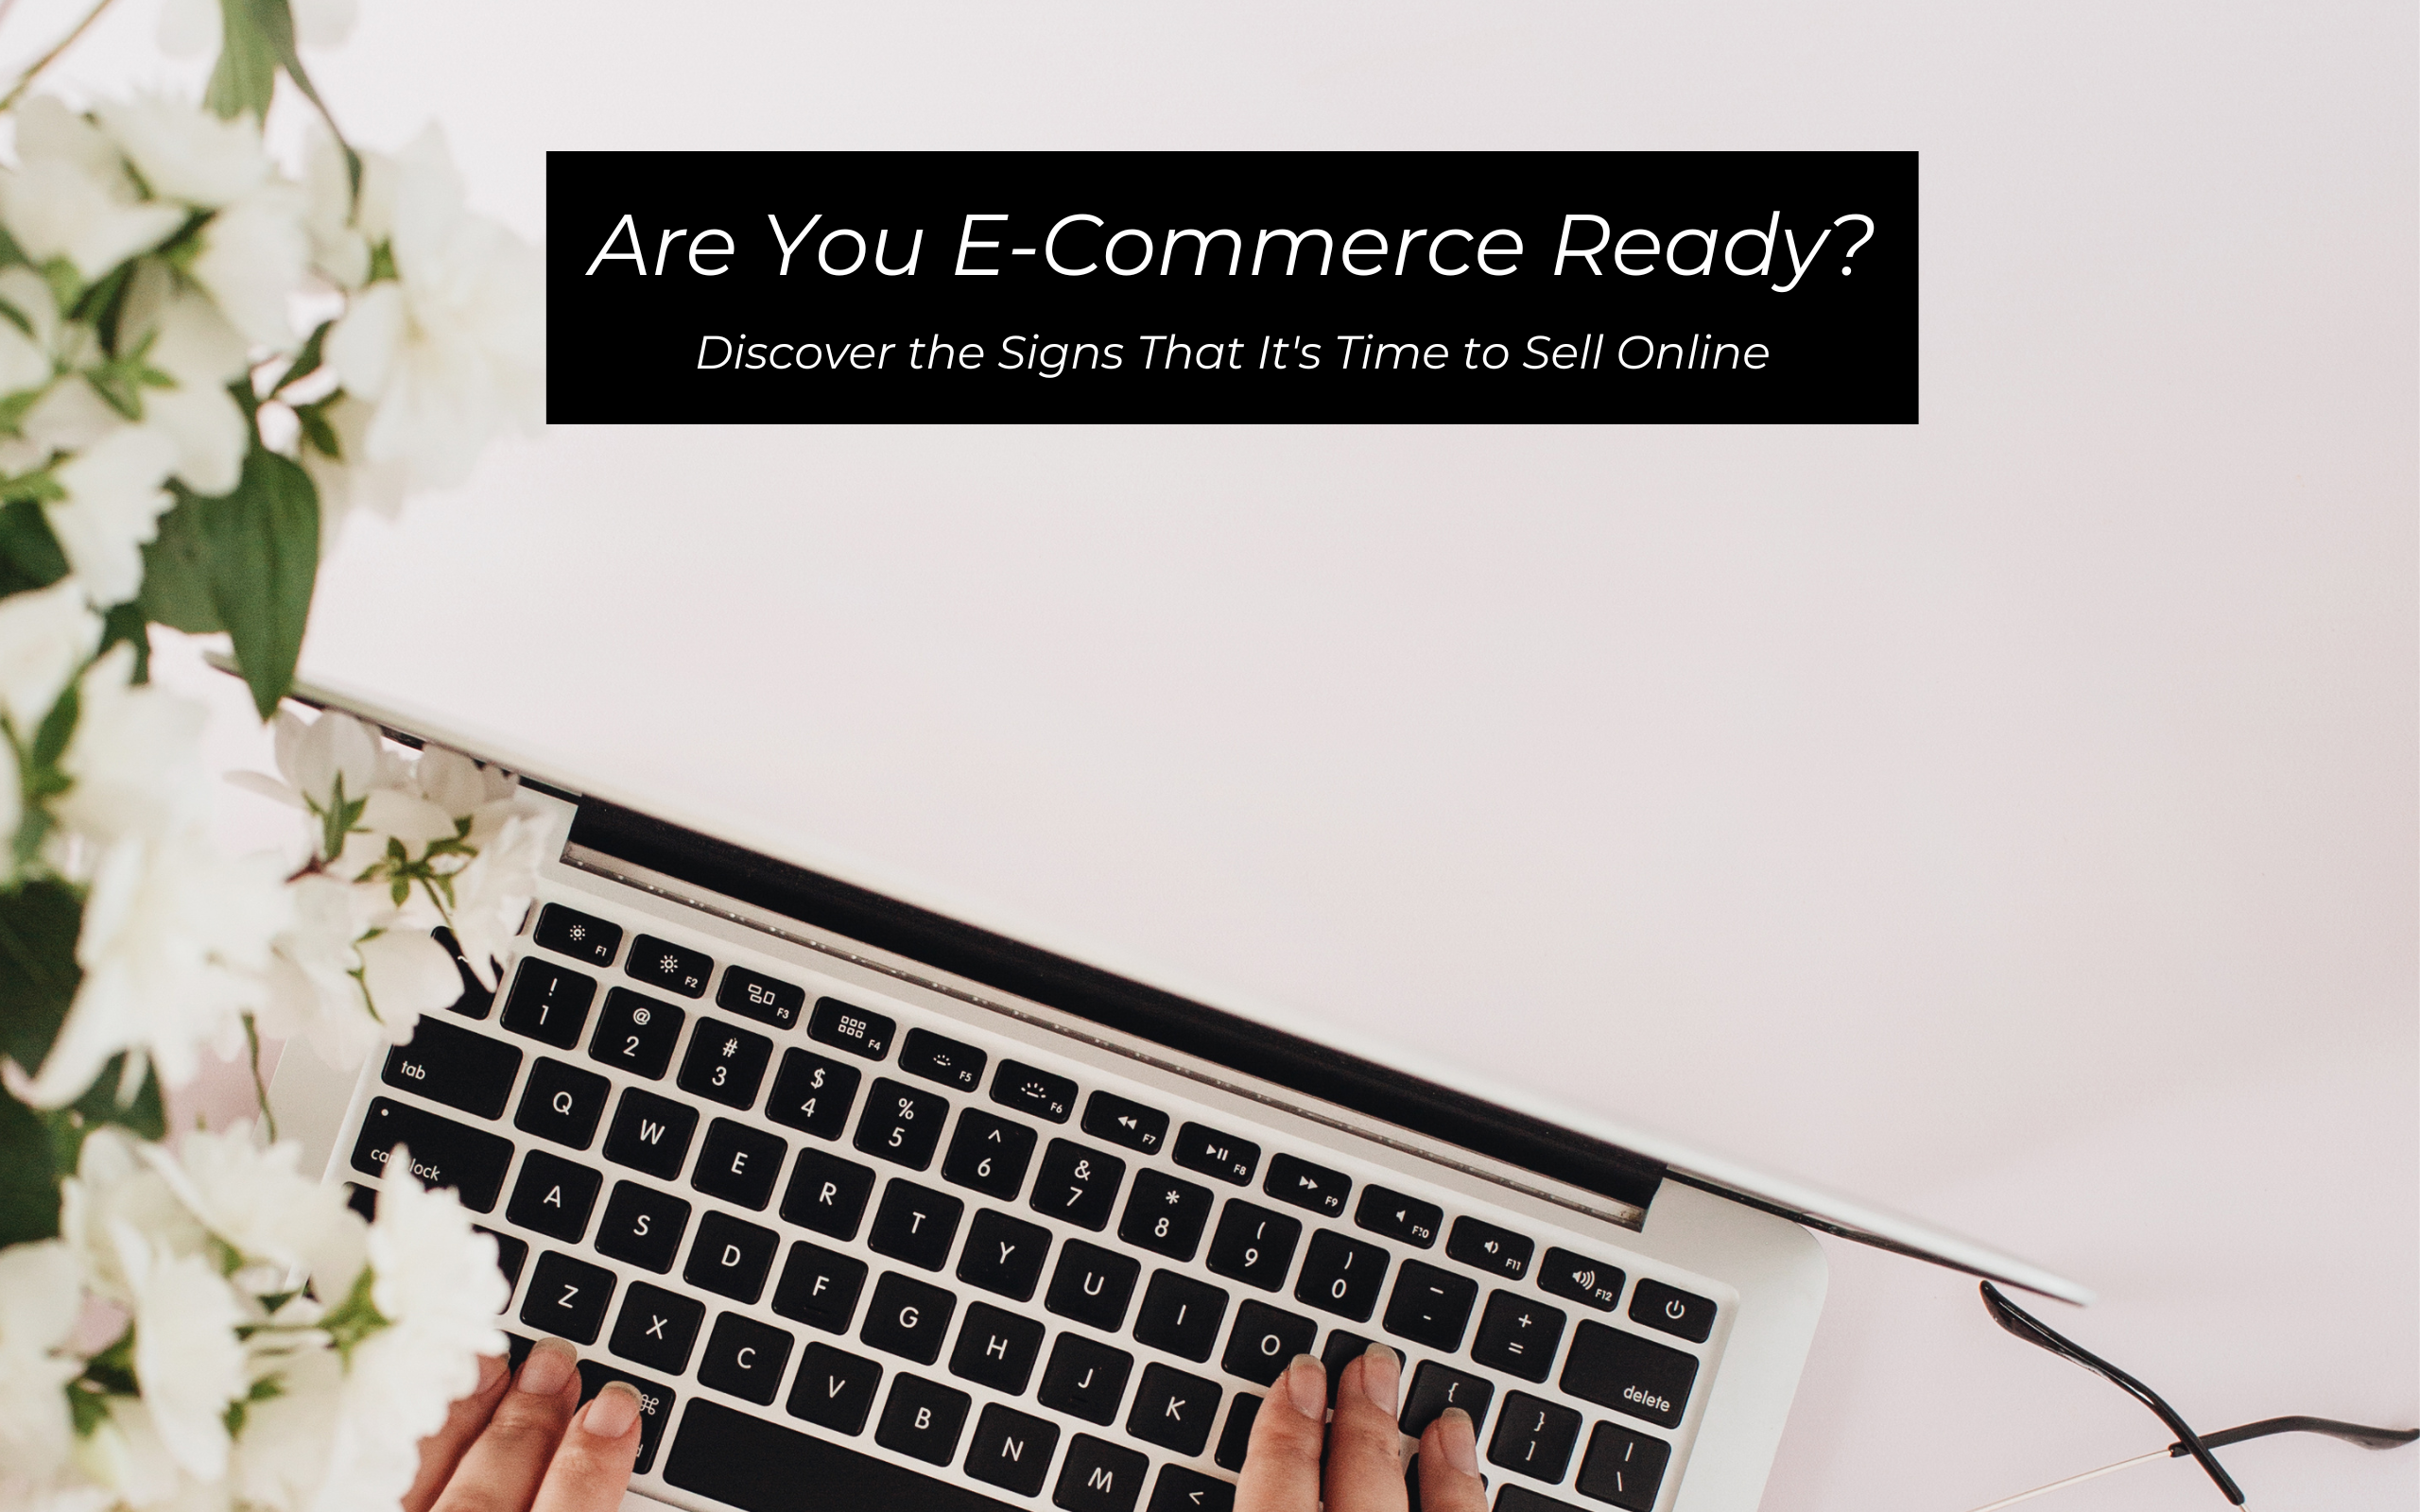 Main image for blog post on readiness for e-commerce, depicting a transition from social media selling to online store setup, a person typing on a laptop